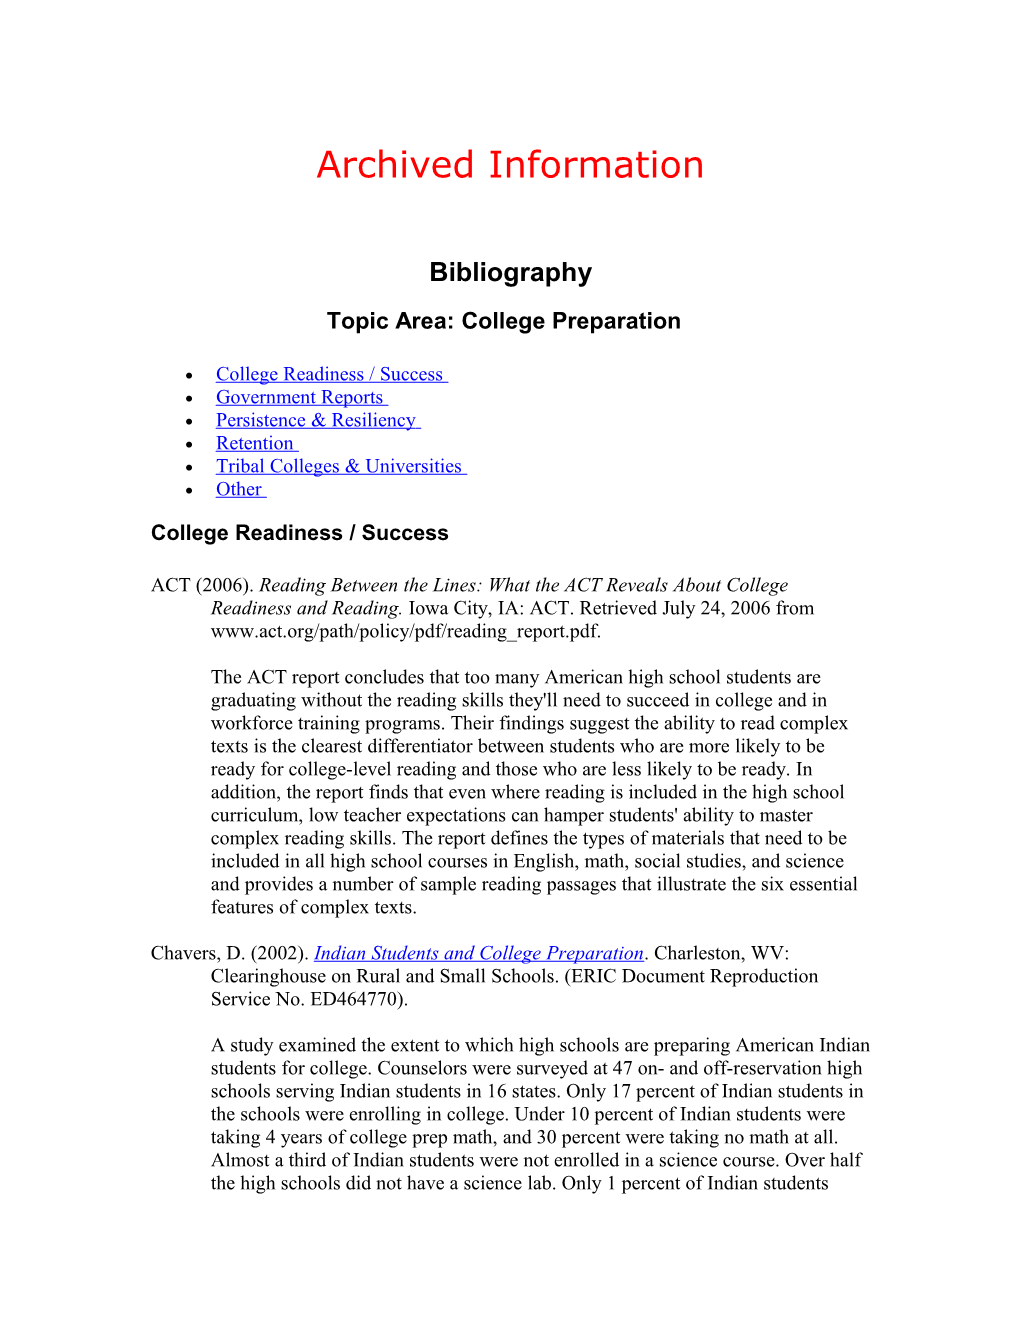 Archived: College Preparation Bibliography (MS Word)